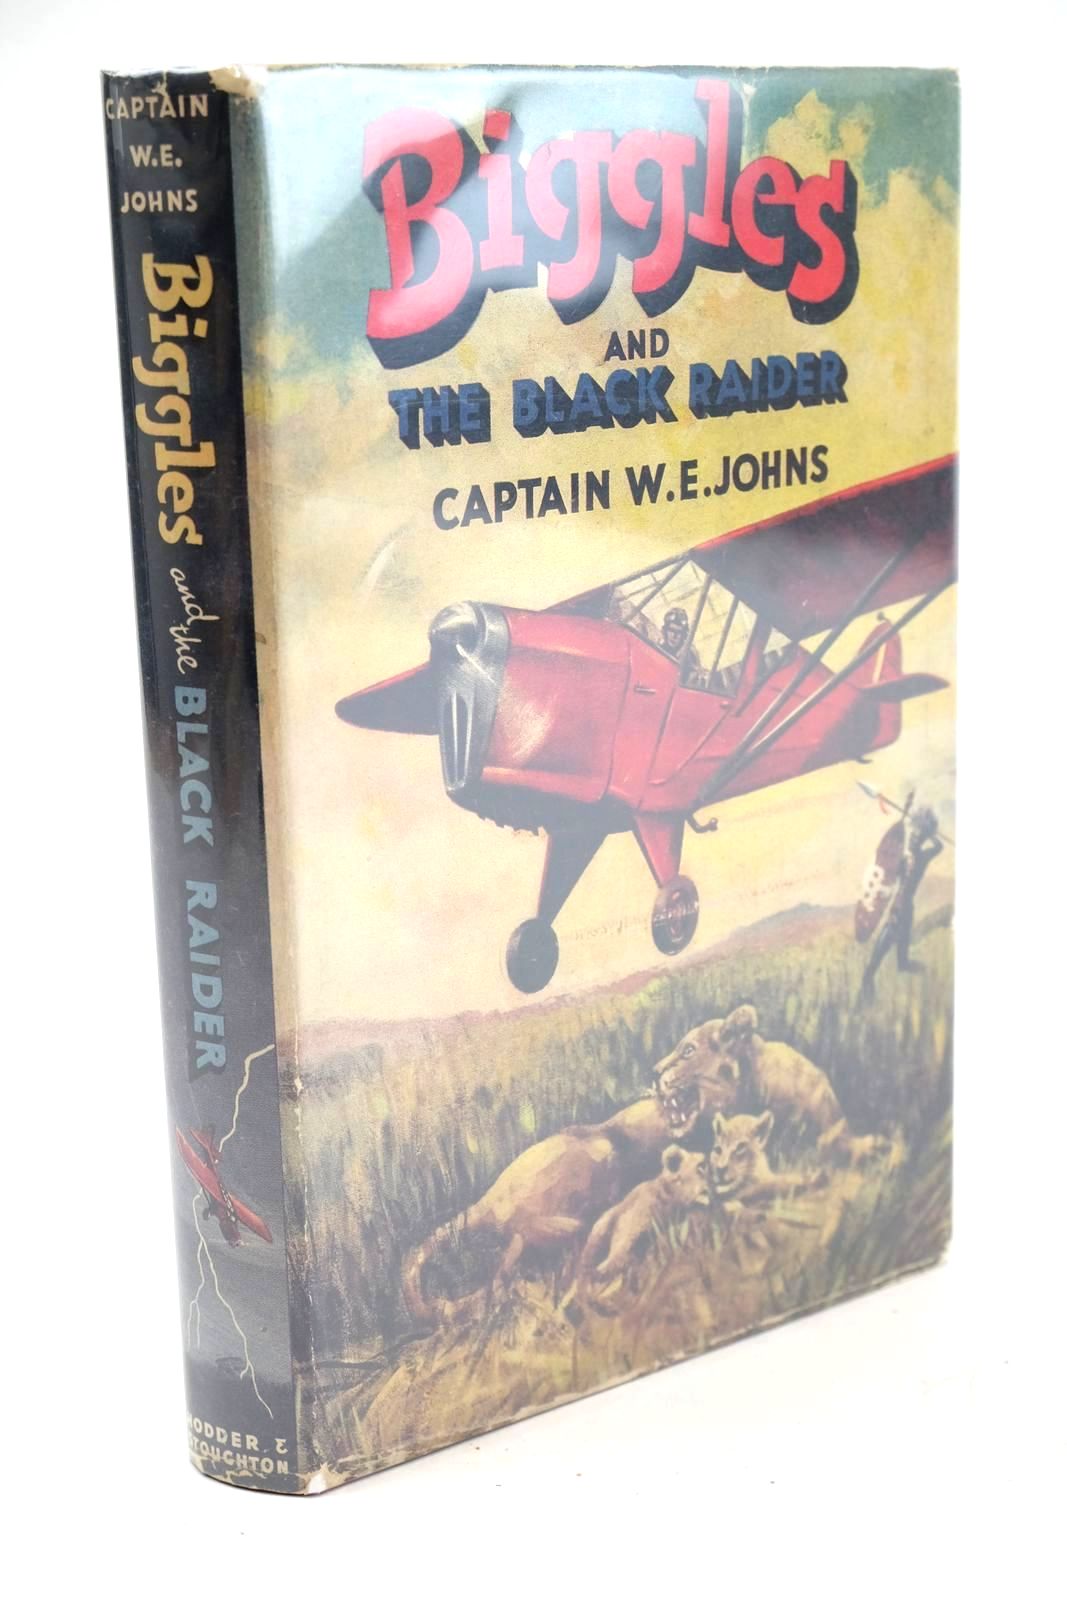 Photo of BIGGLES AND THE BLACK RAIDER written by Johns, W.E. illustrated by Stead,  published by Hodder &amp; Stoughton (STOCK CODE: 1324104)  for sale by Stella & Rose's Books